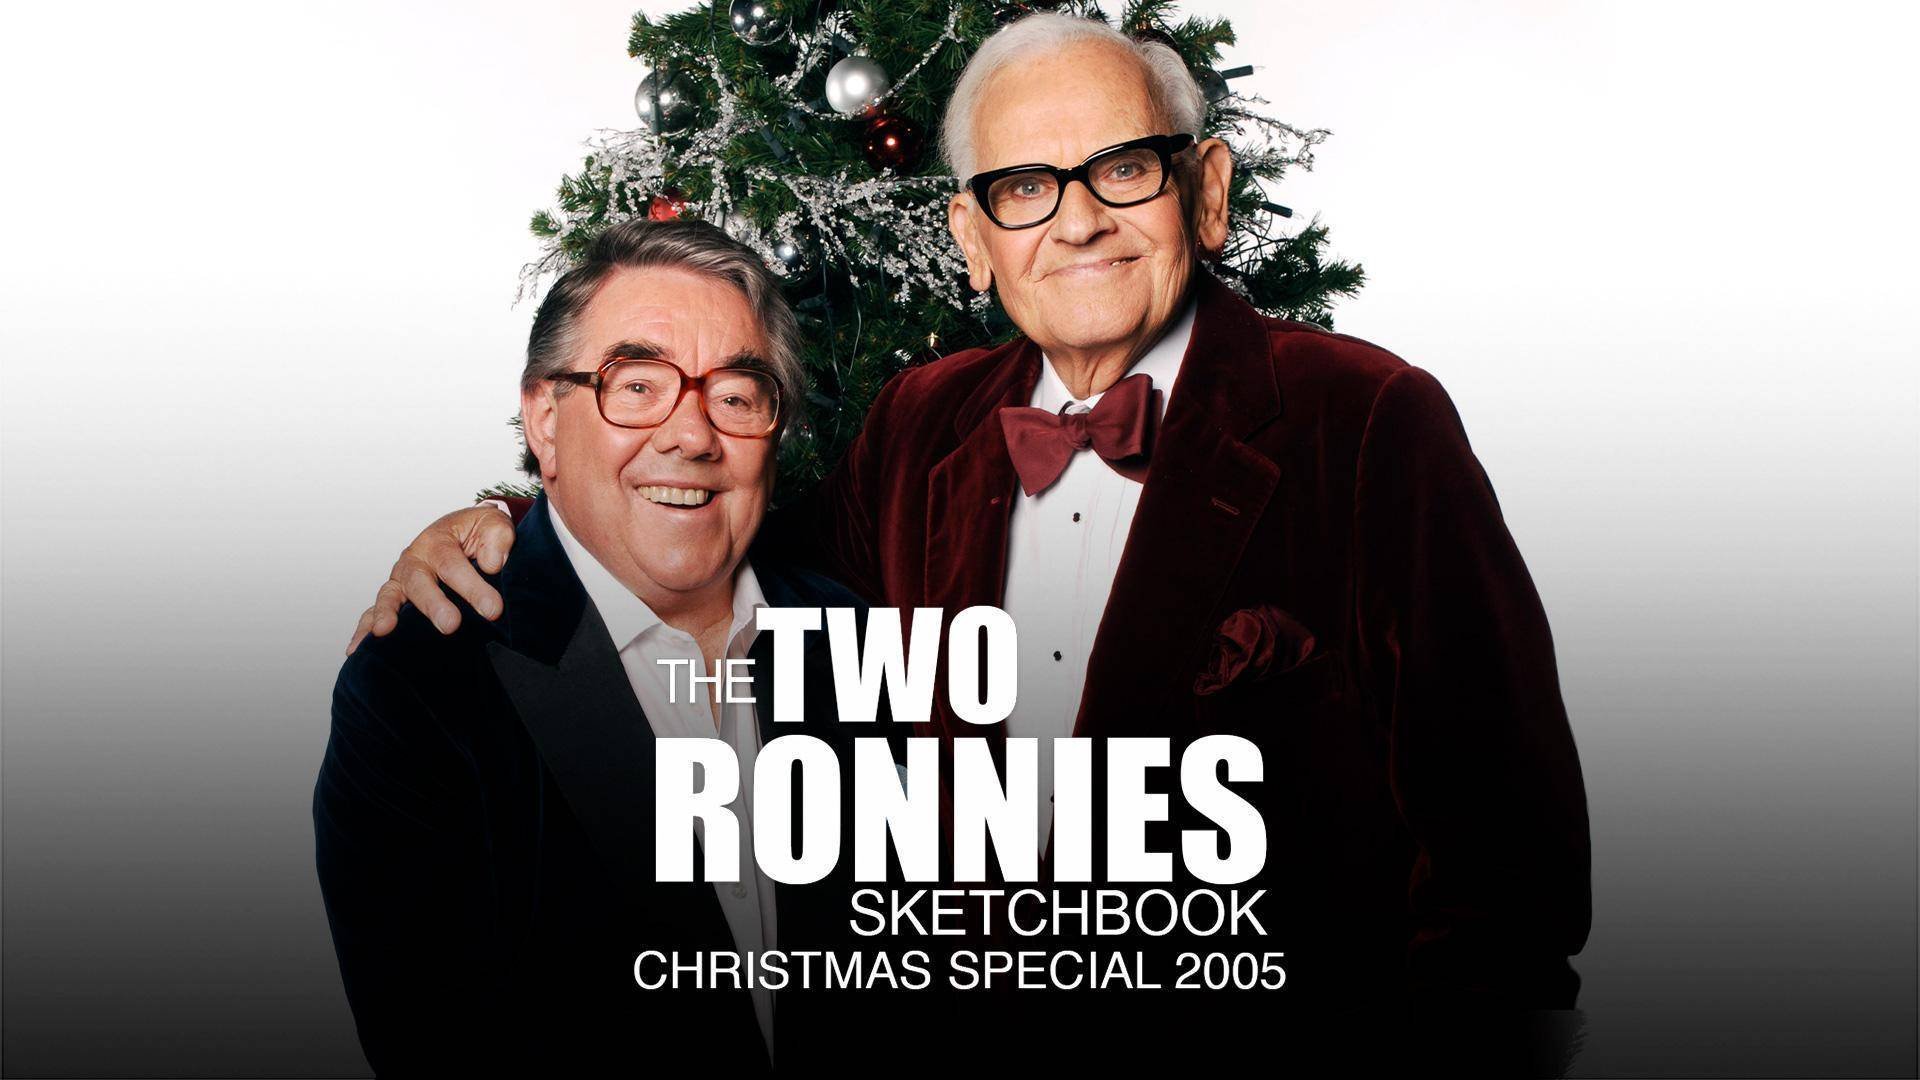 Watch The Two Ronnies season 11 episode 5 streaming online | BetaSeries.com